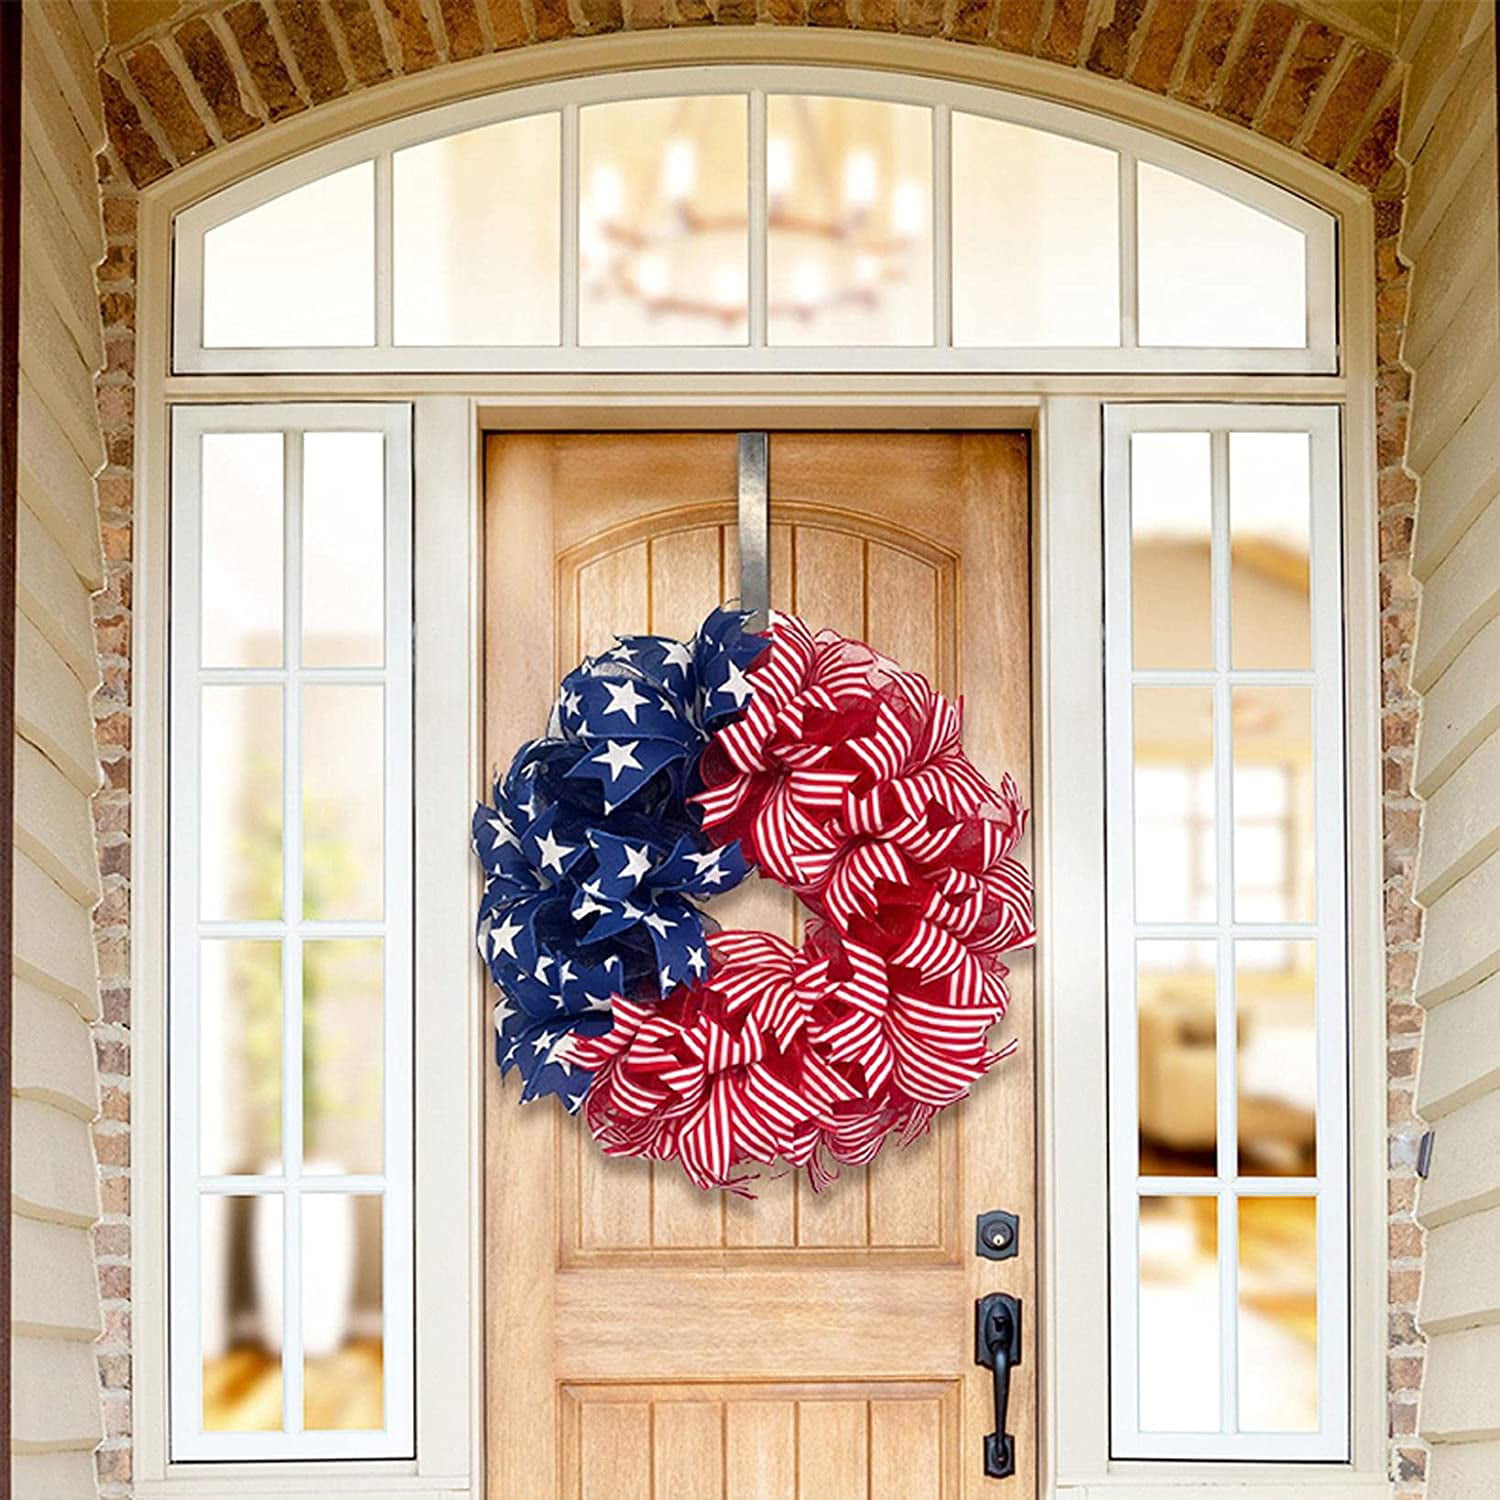 Independence Day Wreath Mother's Day Tulip Wreath for Front Door Decor Handmade Memorial Patriotic 4th of July American Floral Vines Garland Ornaments 